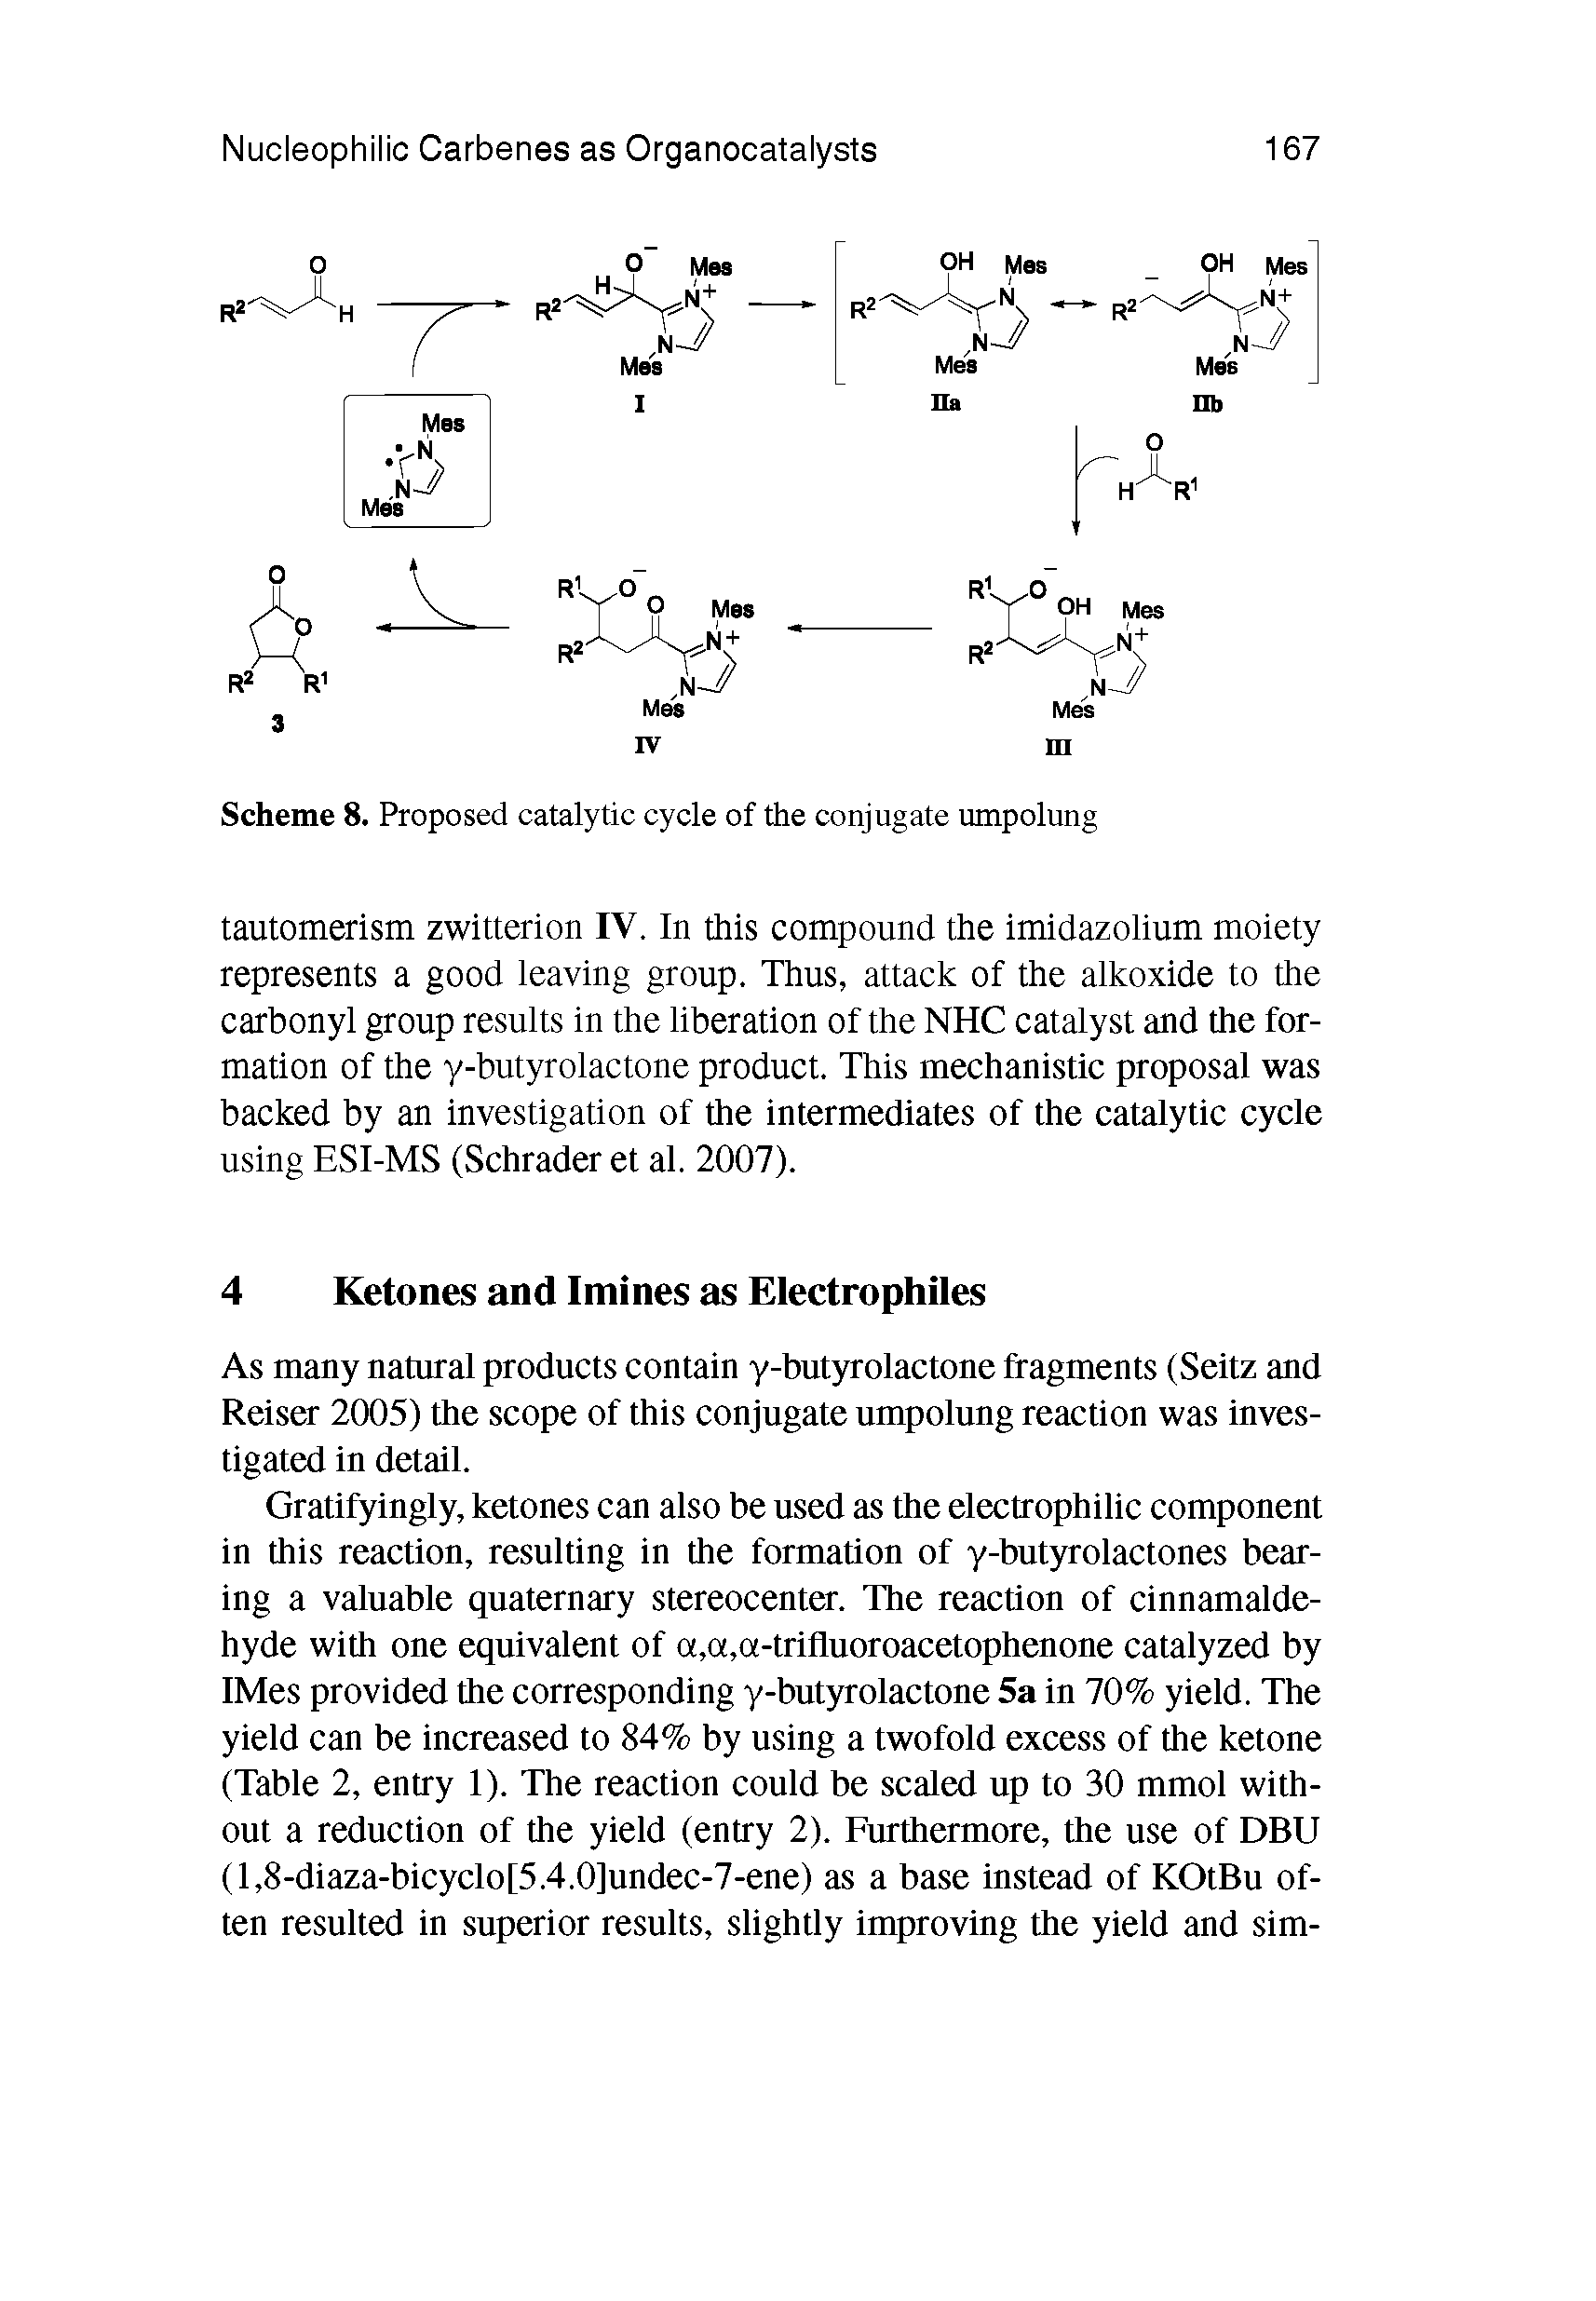 Scheme 8. Proposed catalytic cycle of the conjugate umpolung...